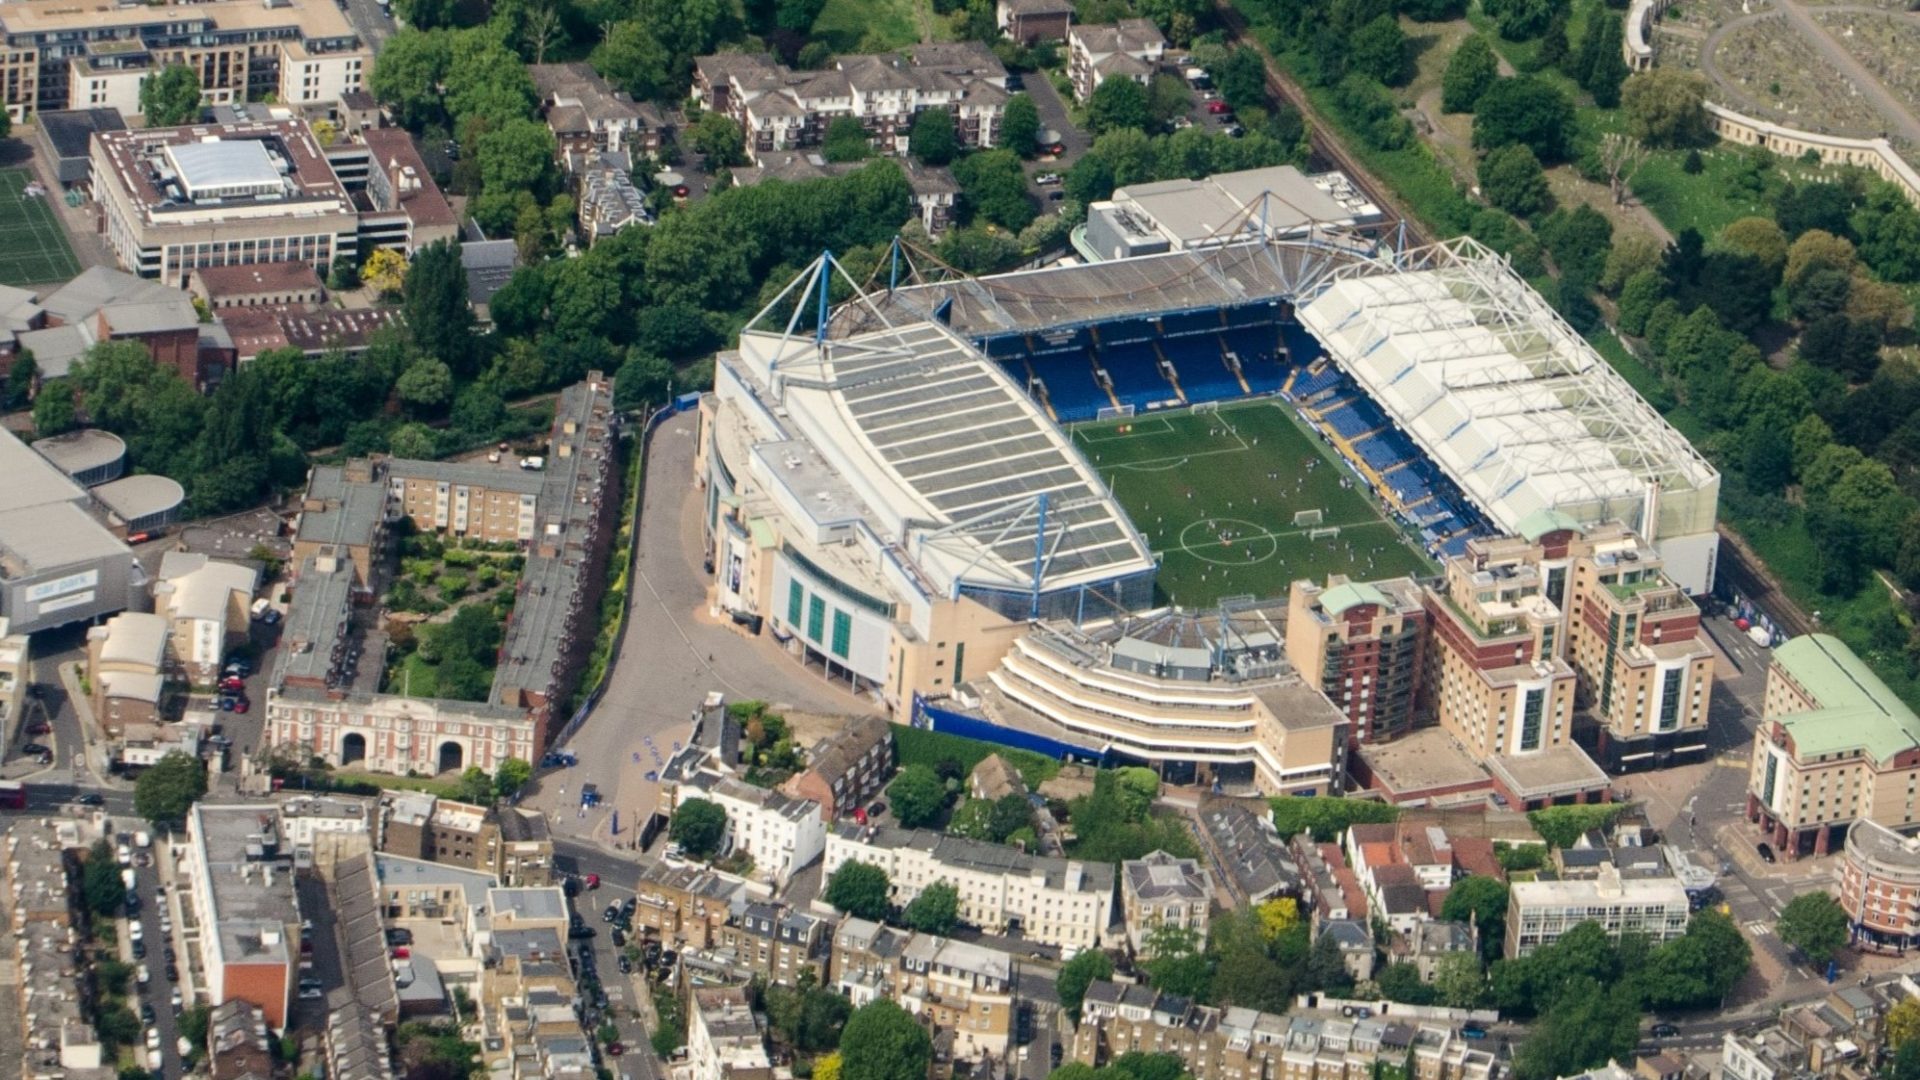 The Stoll Mansions site is pictured immediately to the left of Stamford Bridge stadium (image: Dreamstime).